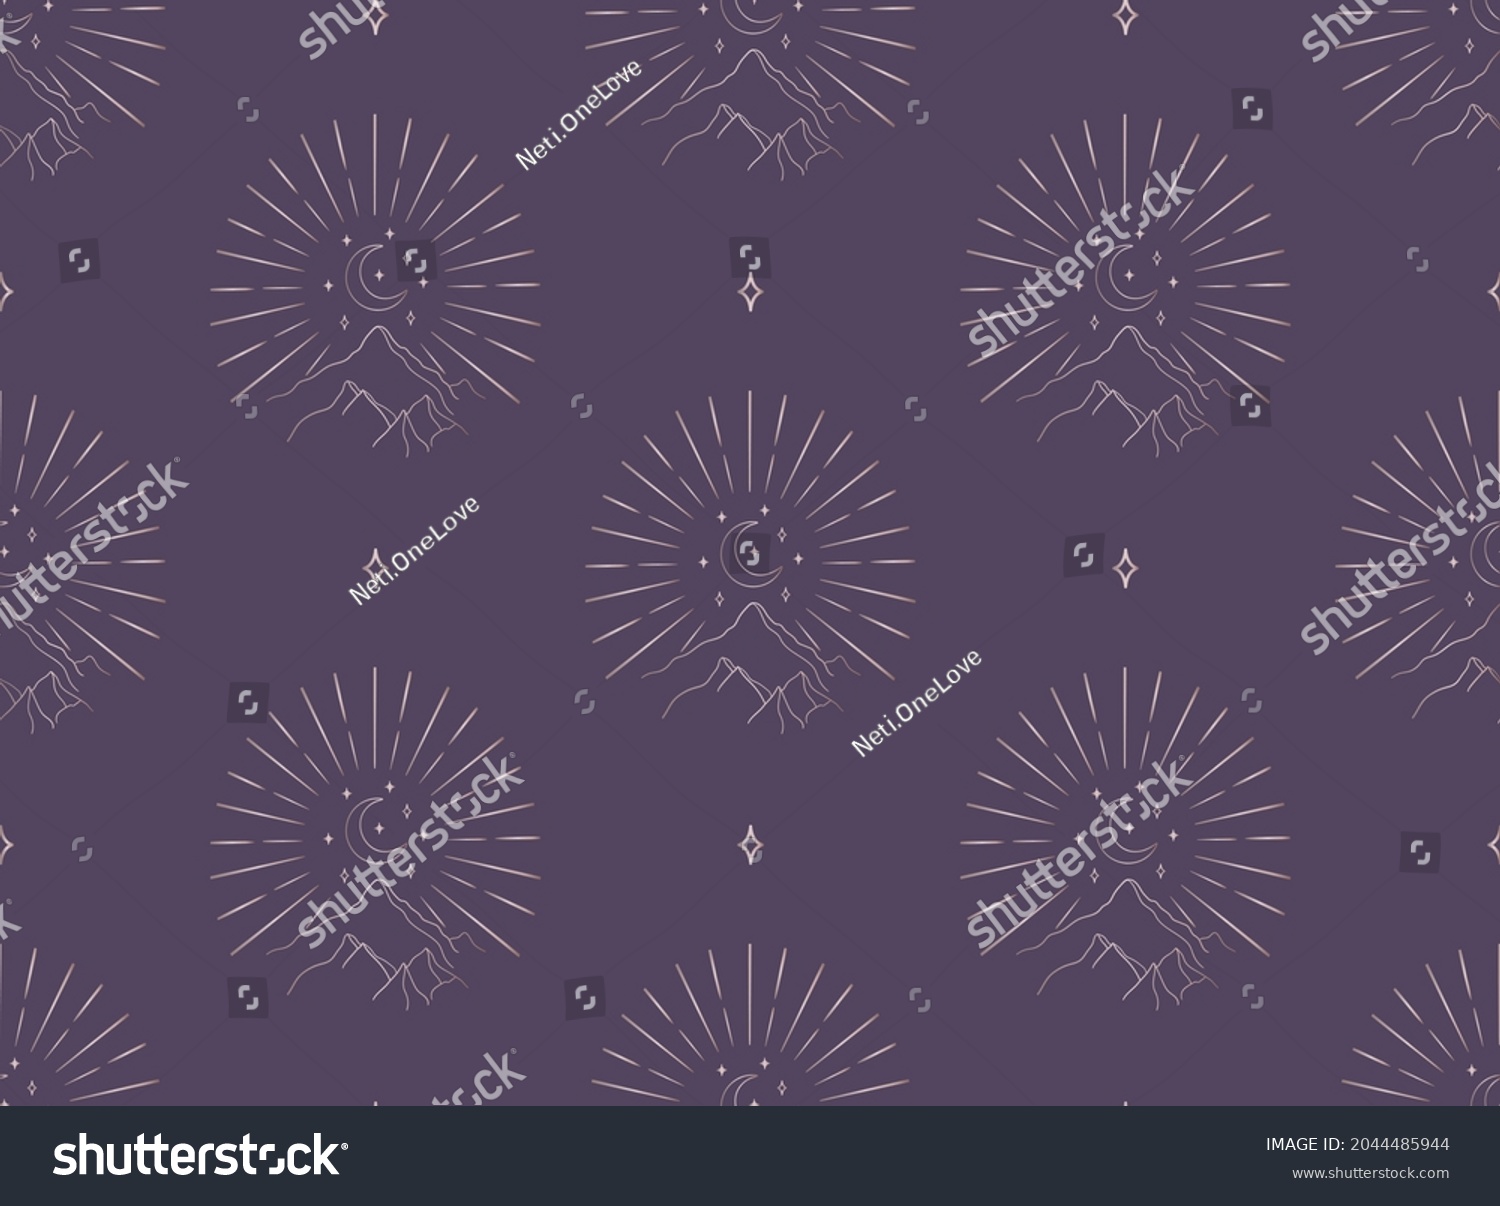 SVG of Abstract Background Seamless Pattern with Crescents, Stars, Suns, mountains, hills, rays. Mystic Design, Vector Illustration for wrapping tissue paper. Pink Gold svg